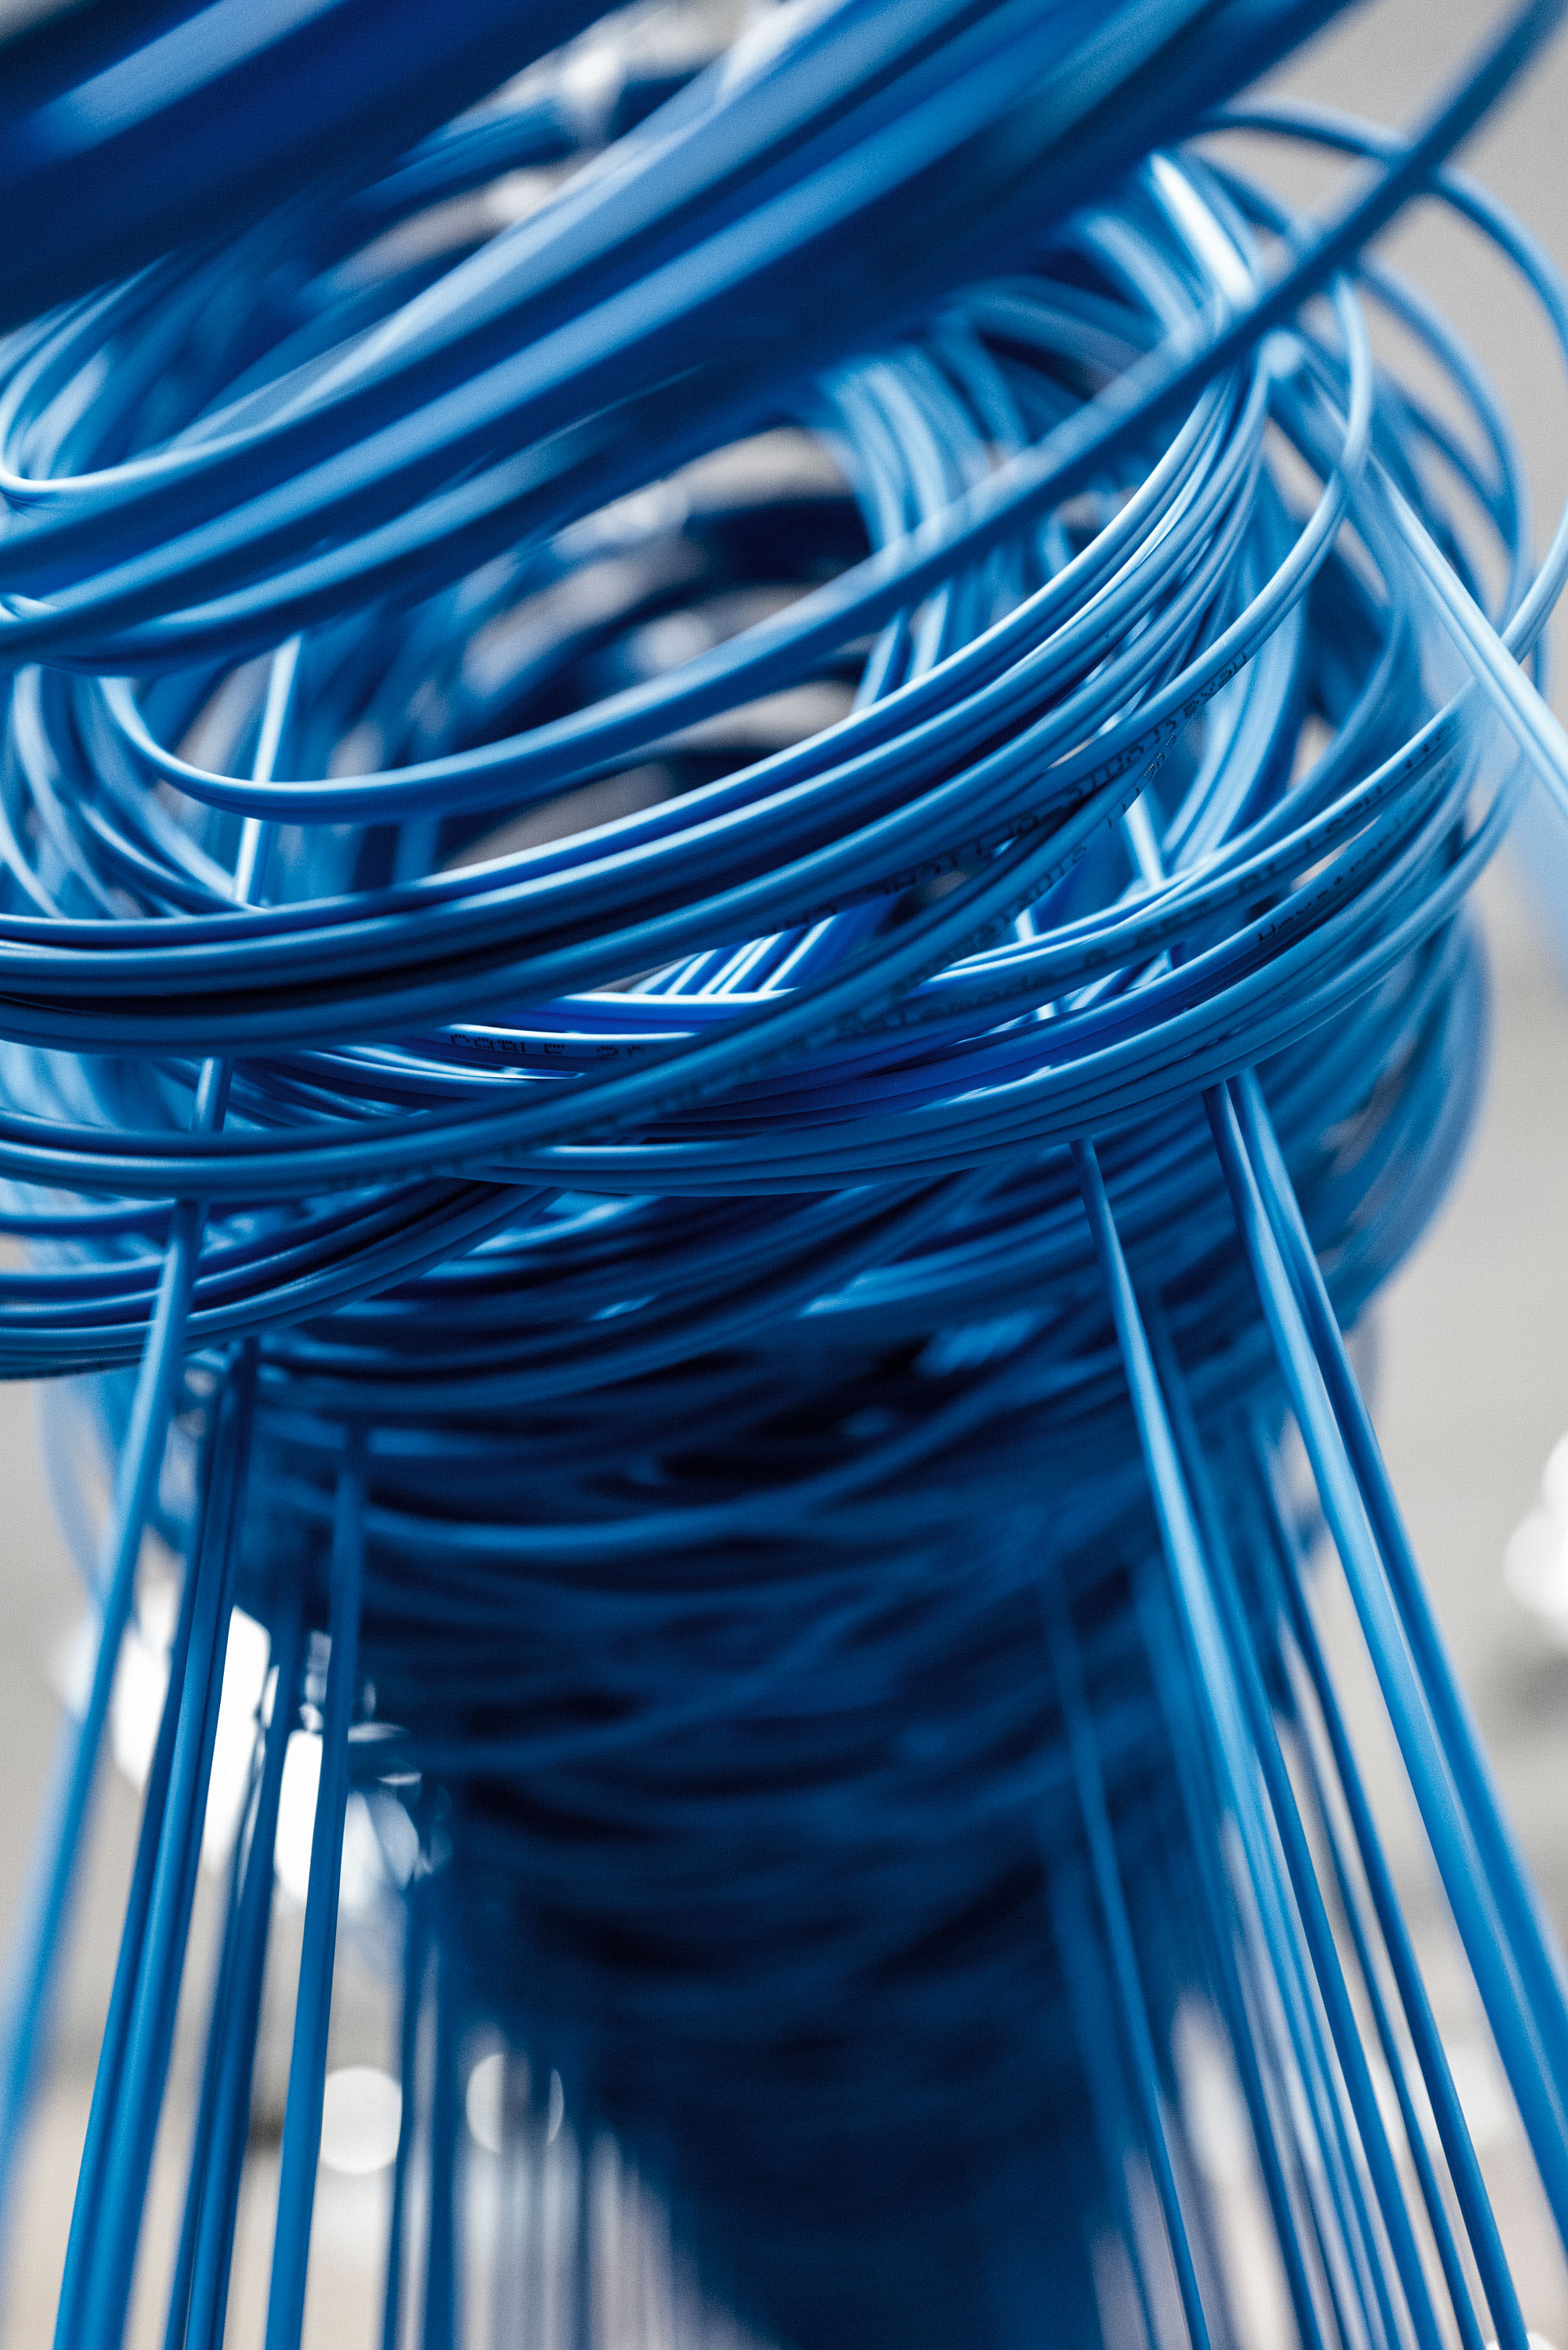 Close-up of fiber cables tangled in an intricate pattern, reflecting light, with a blurred background.